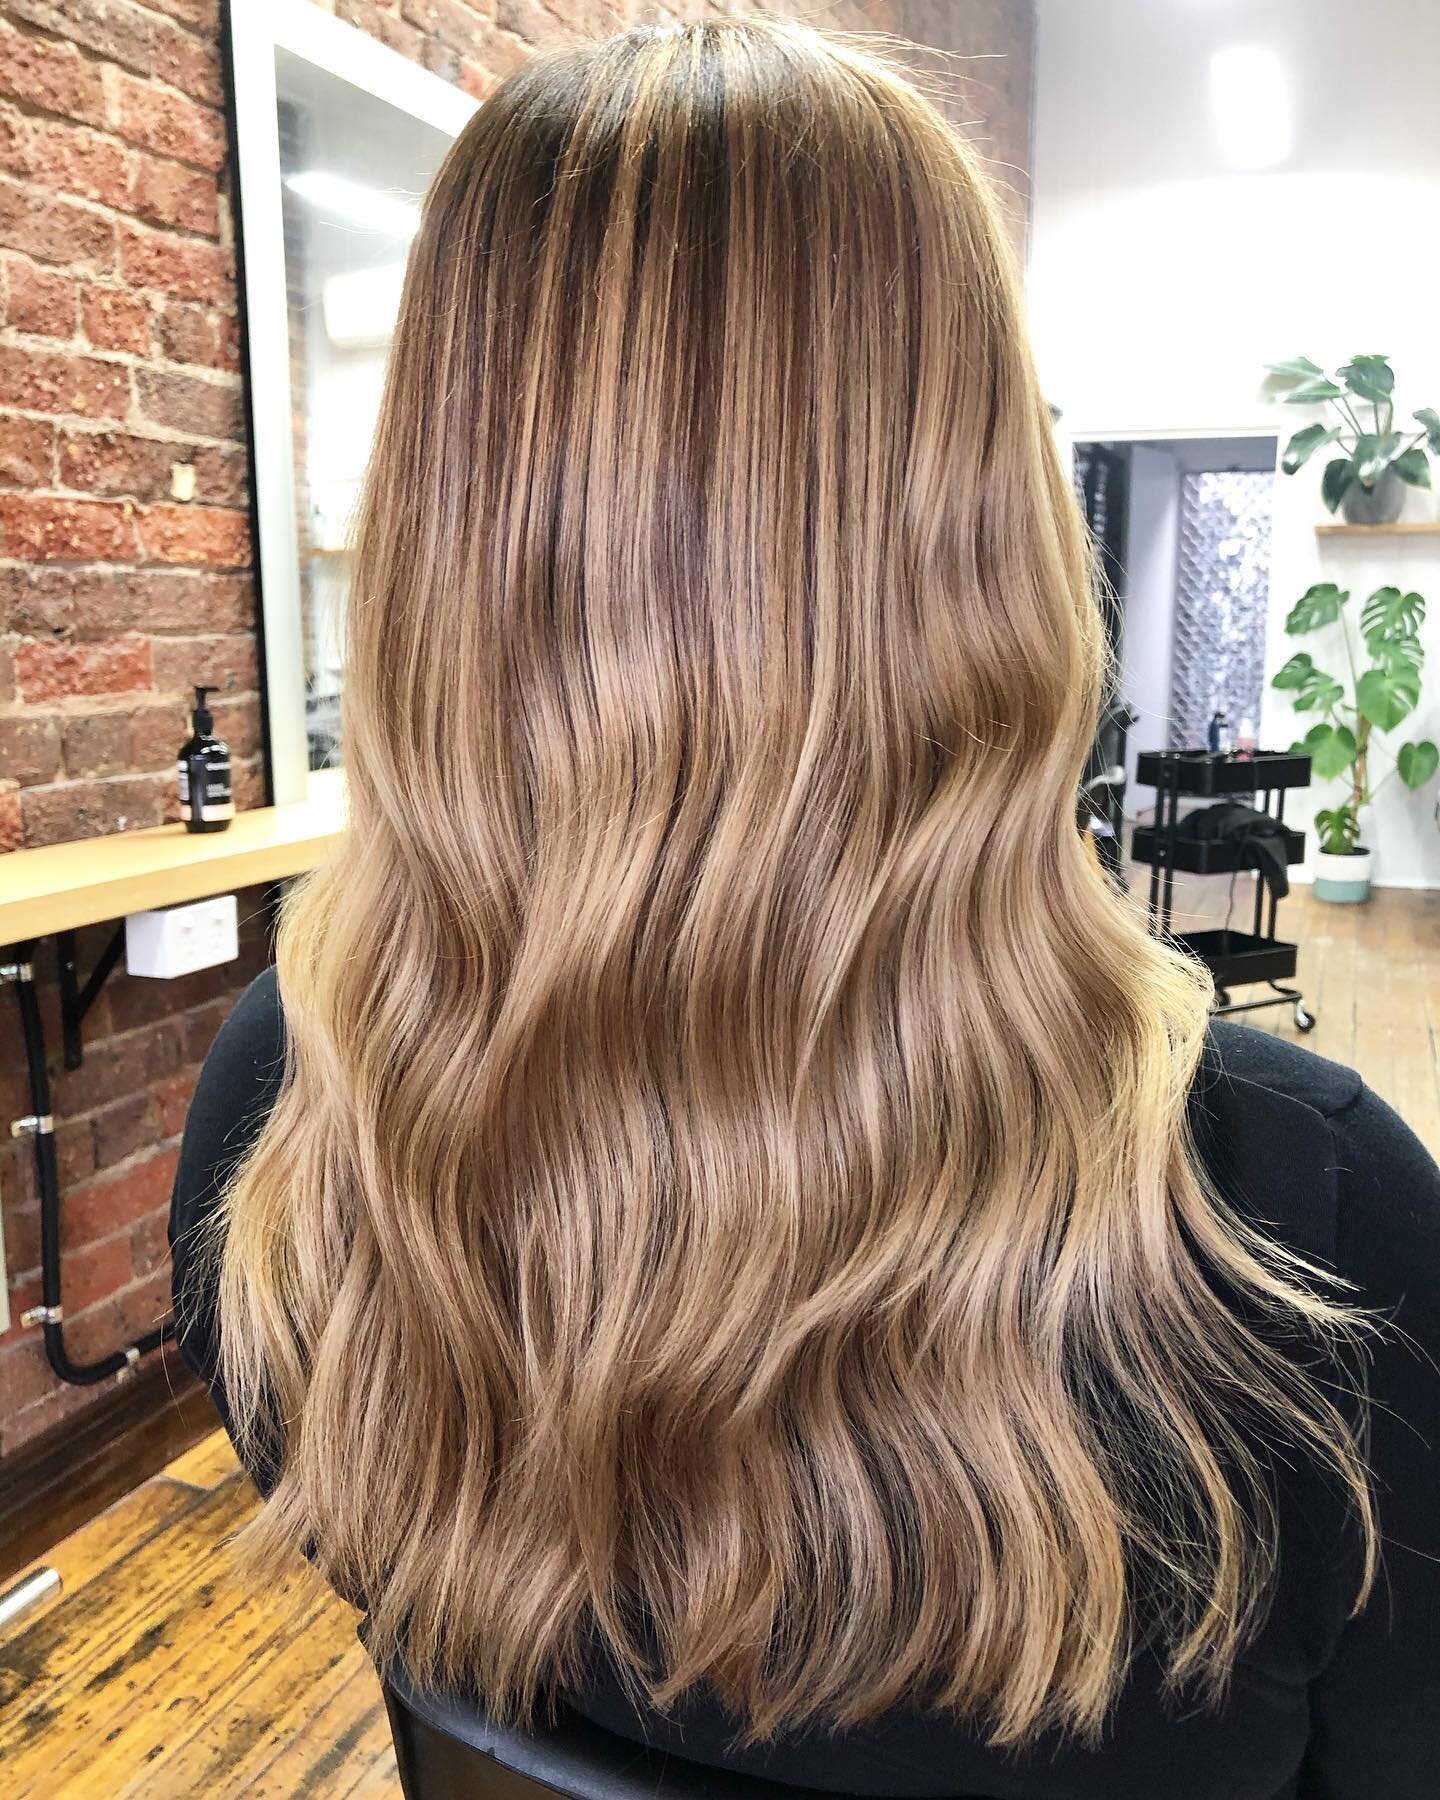 Covid box colour claimed another victim 😂
We broke through a band of super dark brown to get to this natural BRONDE 🥰✨⭐️ stunning!